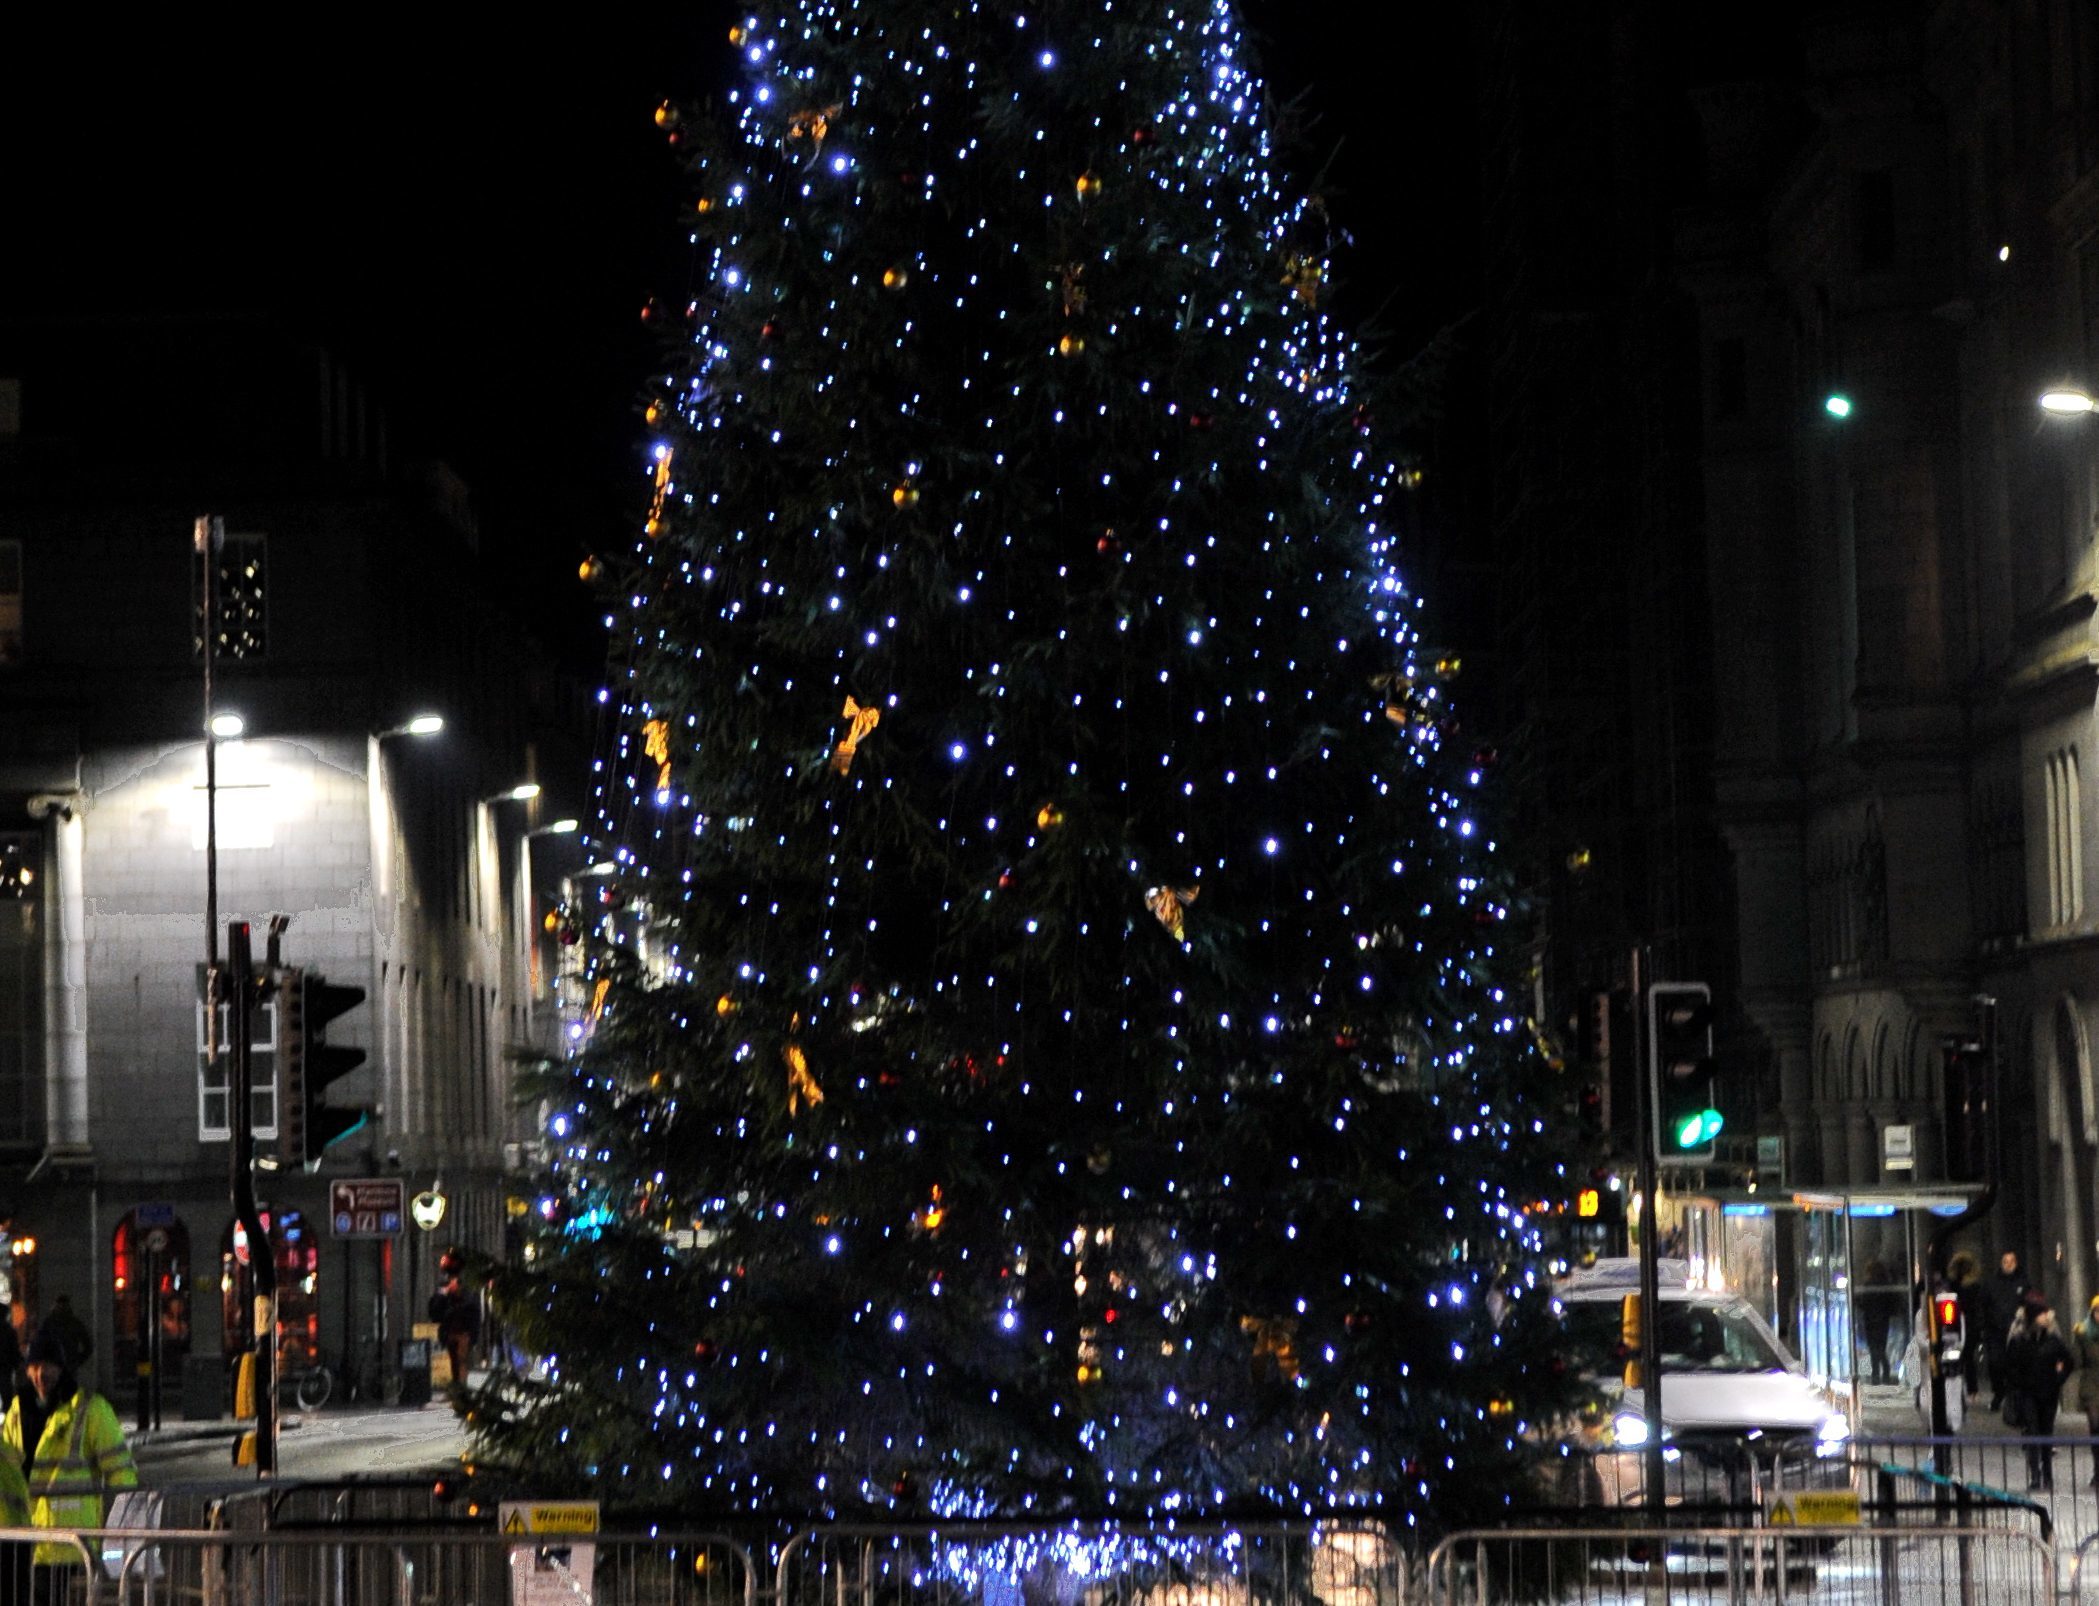 Last year's Aberdeen Christmas Tree Light Switch-On event